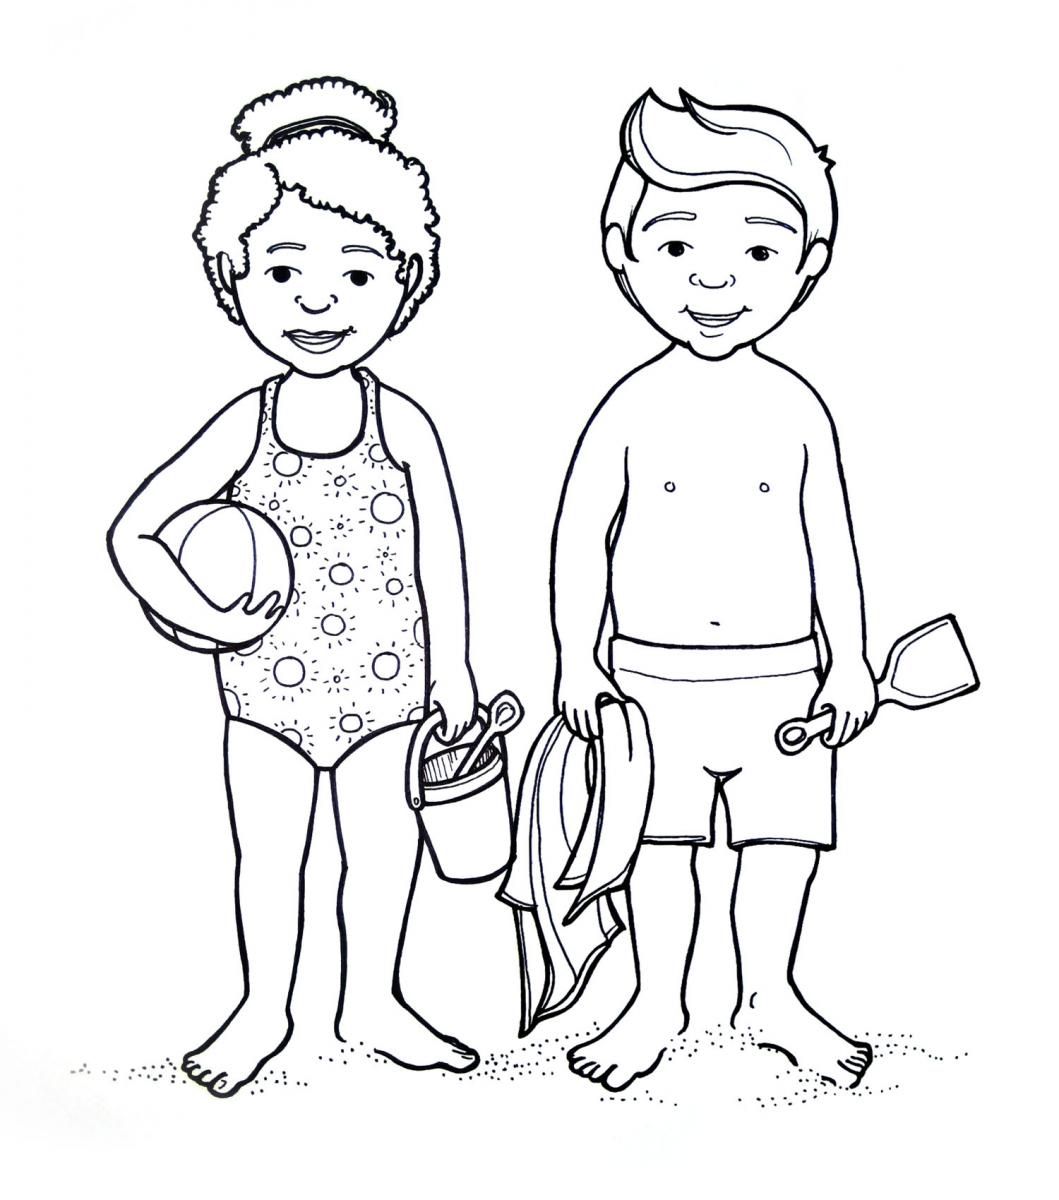 swimming suit coloring pages - Clip Art Library